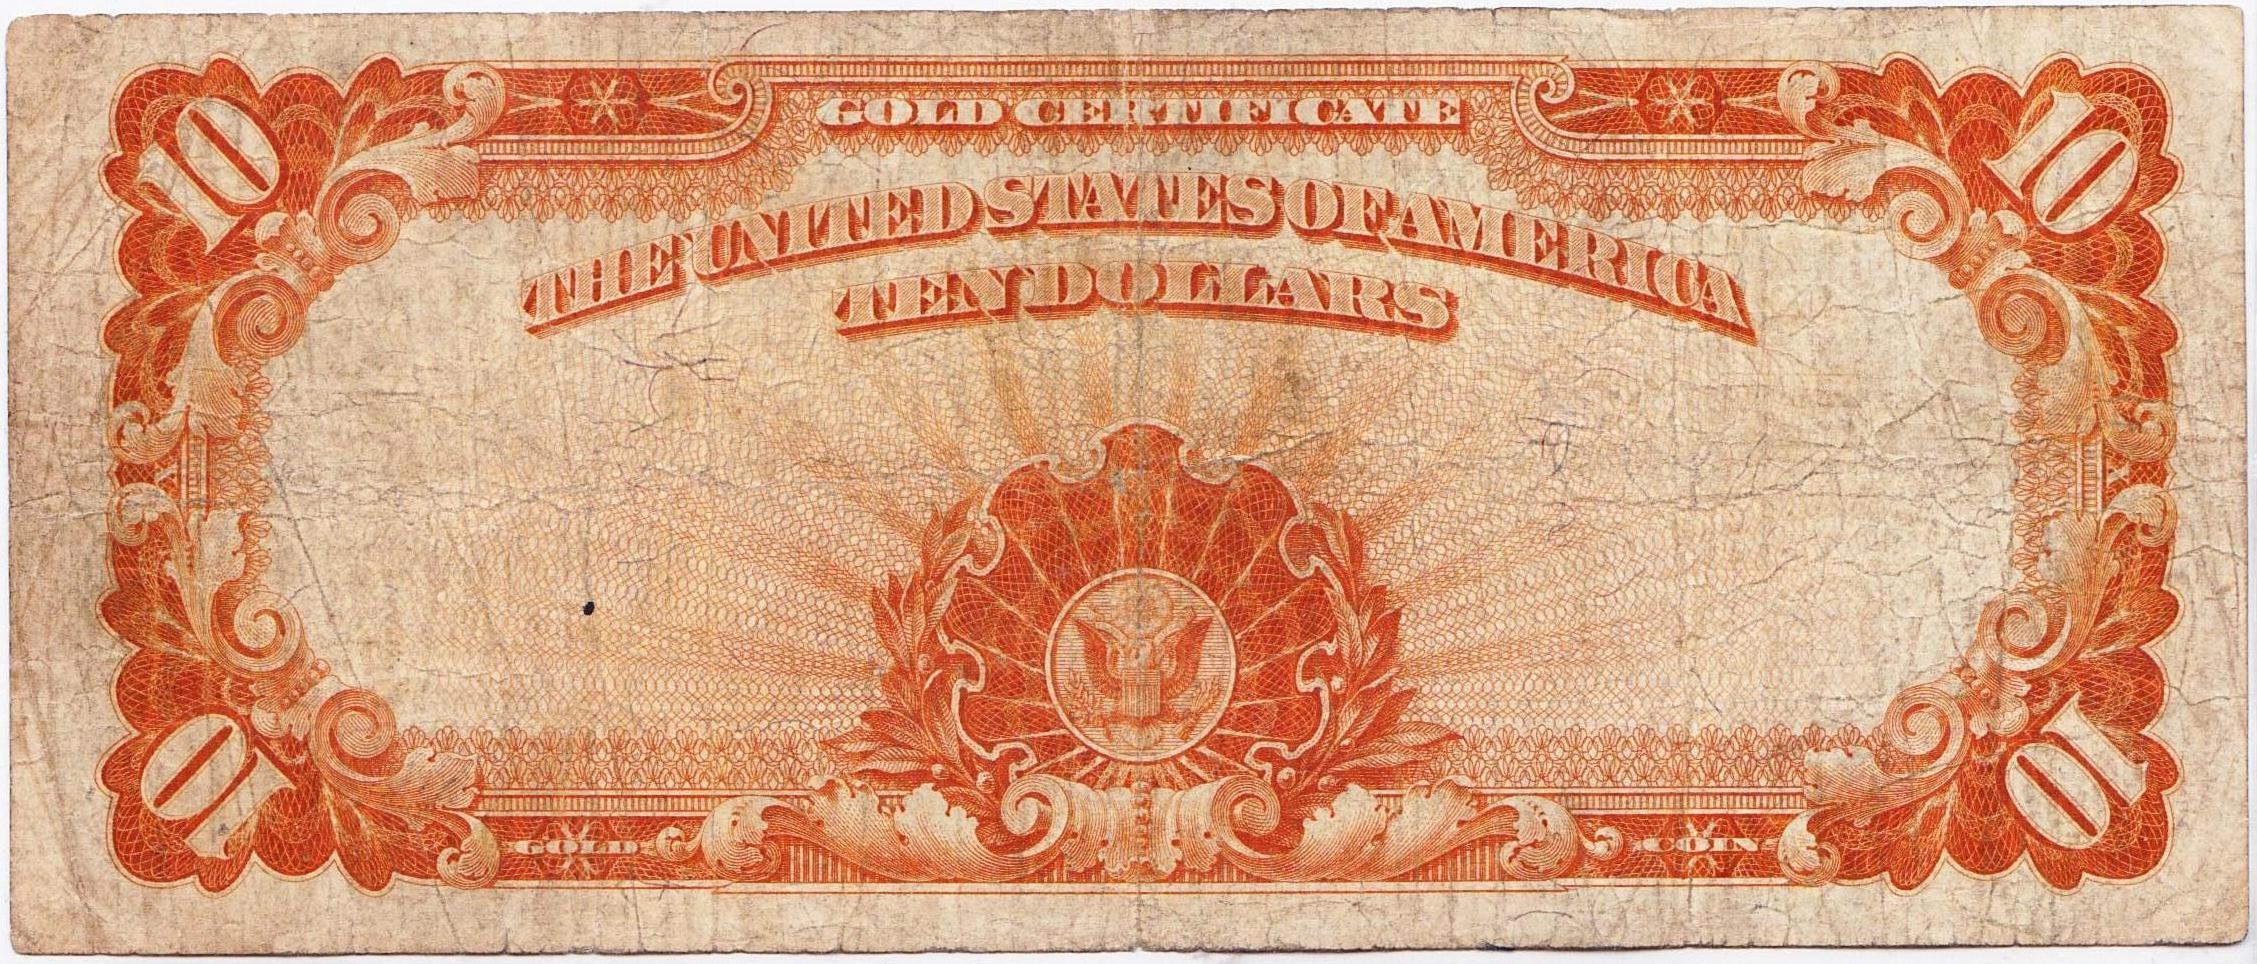 1907 U.S. large size $10 gold seal gold certificate banknote